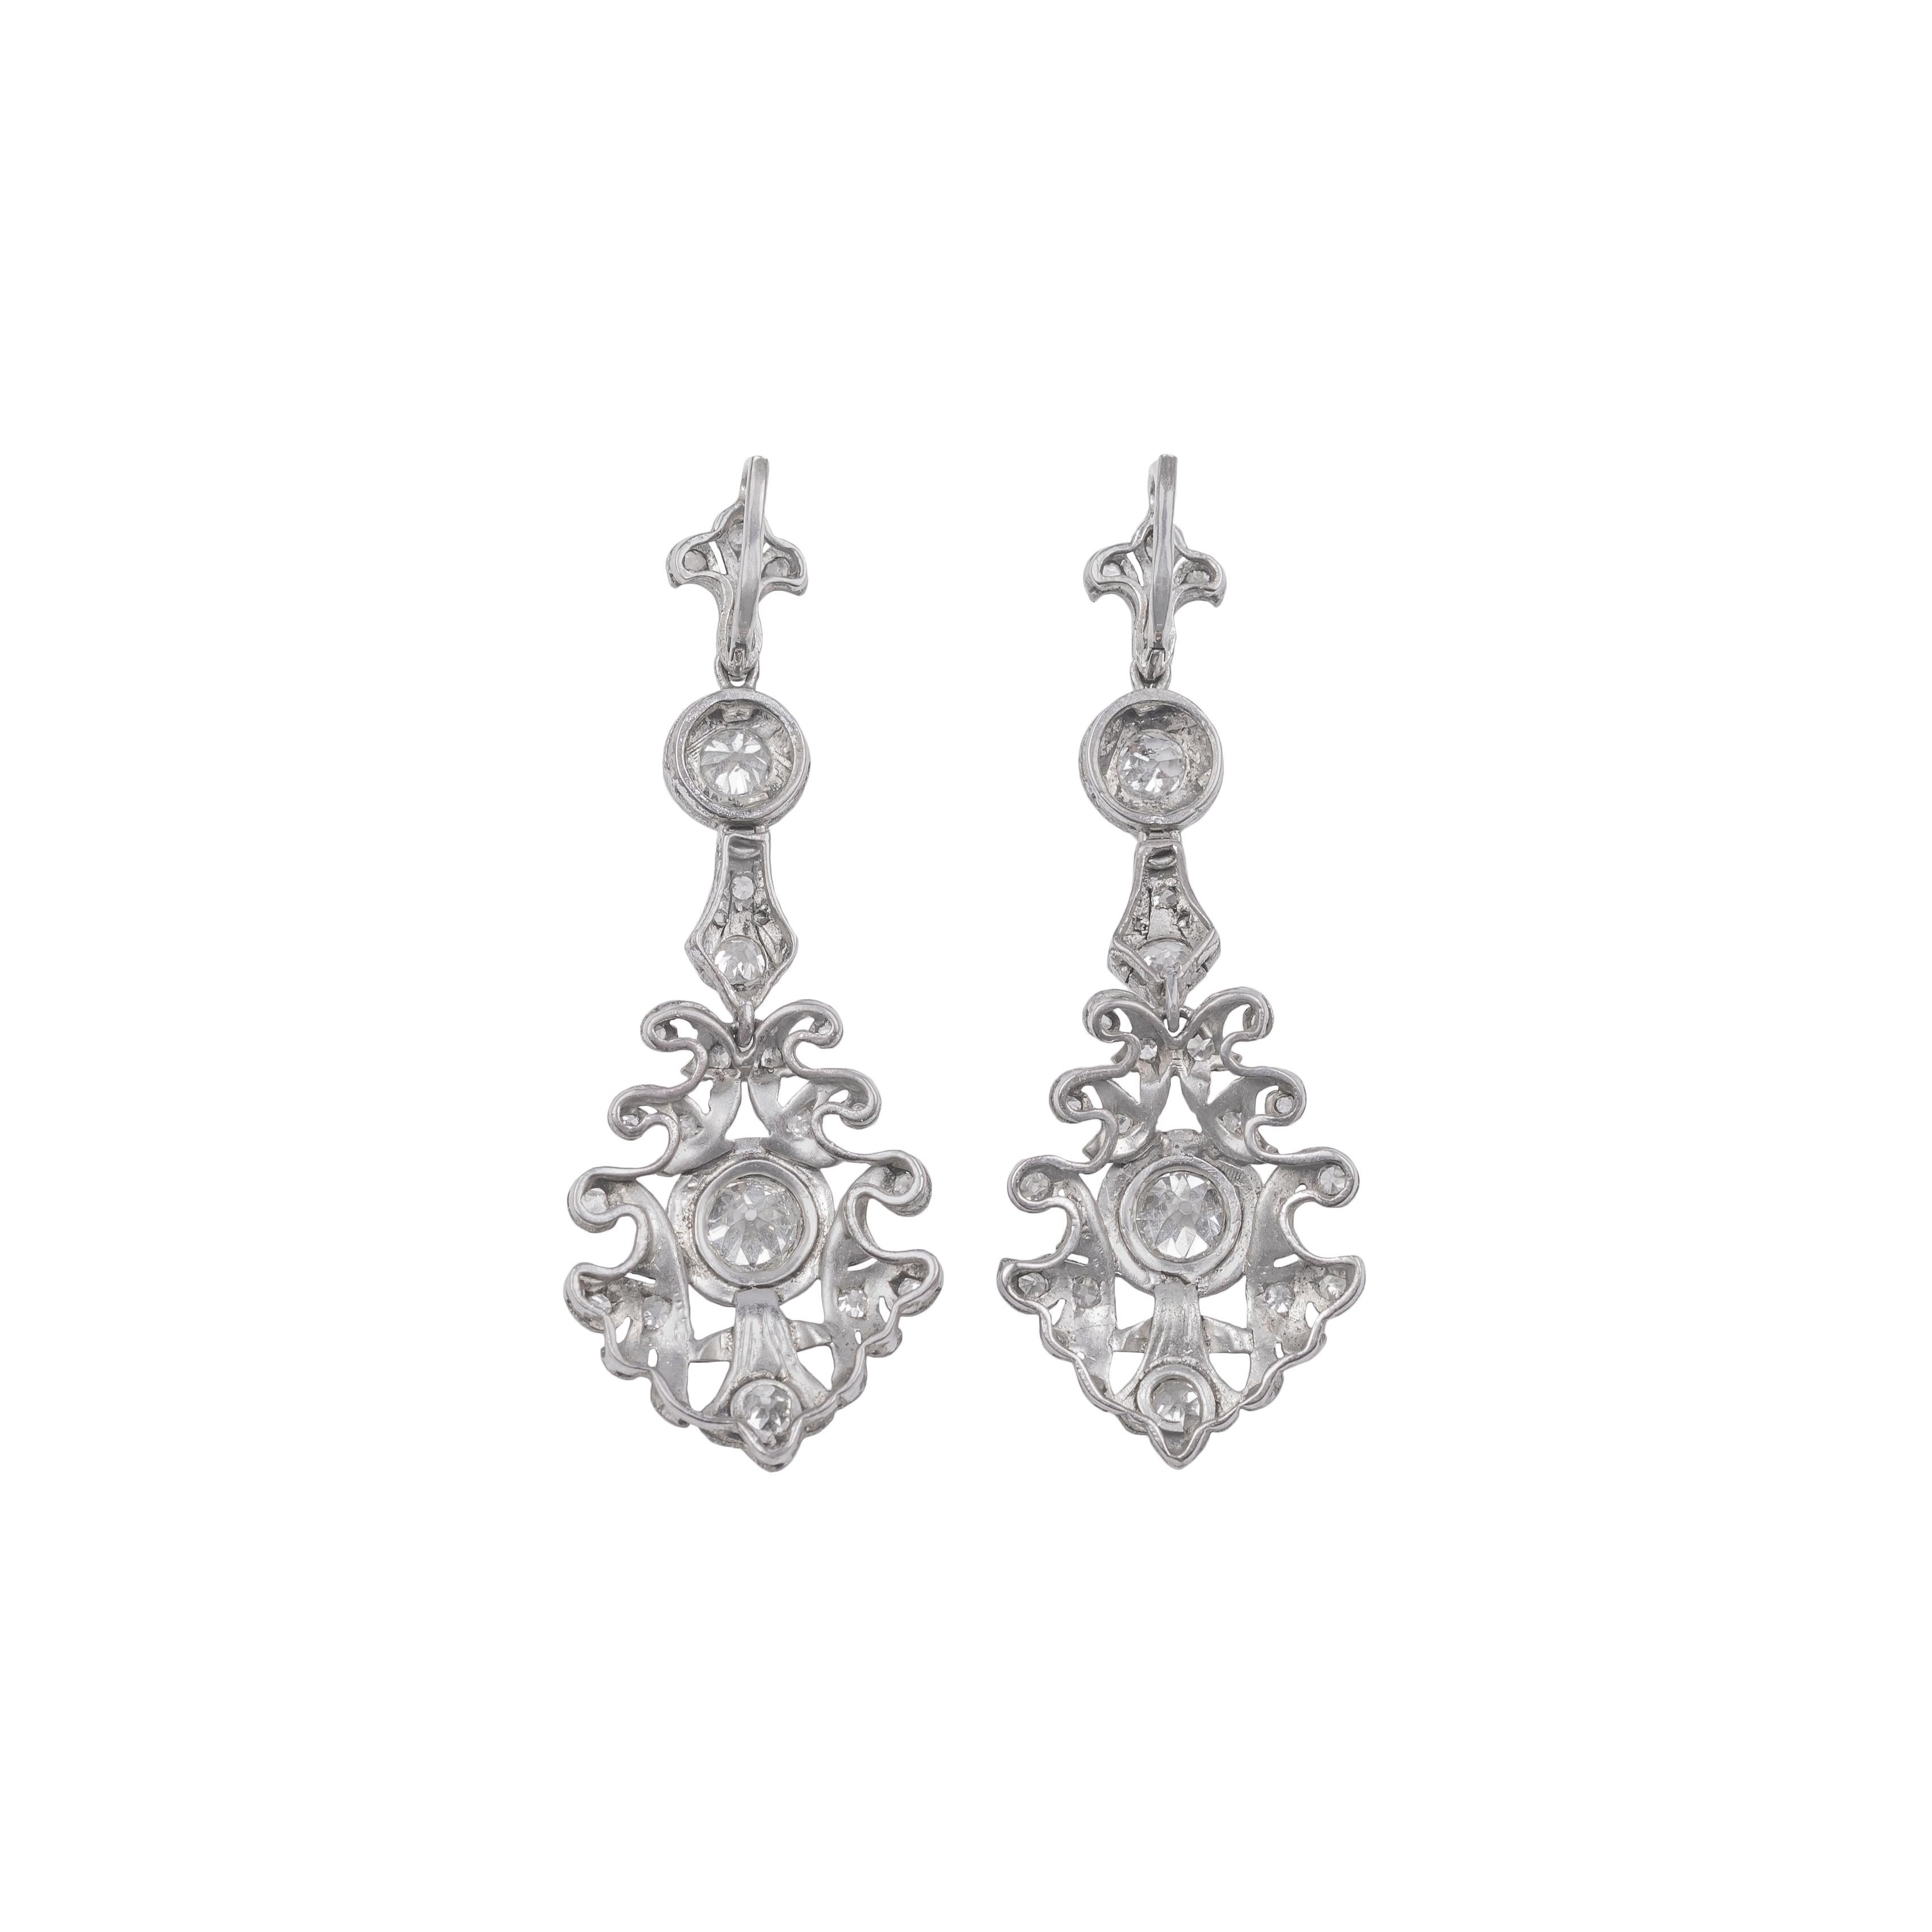 These chandelier earrings were made in Italy in the early Twentieth Century.
They feature lever back closures, decorated white gold and 24 brilliant cut white diamonds all along the frame.

Total weight is 10.90gr
Diamonds content is 2.38ct